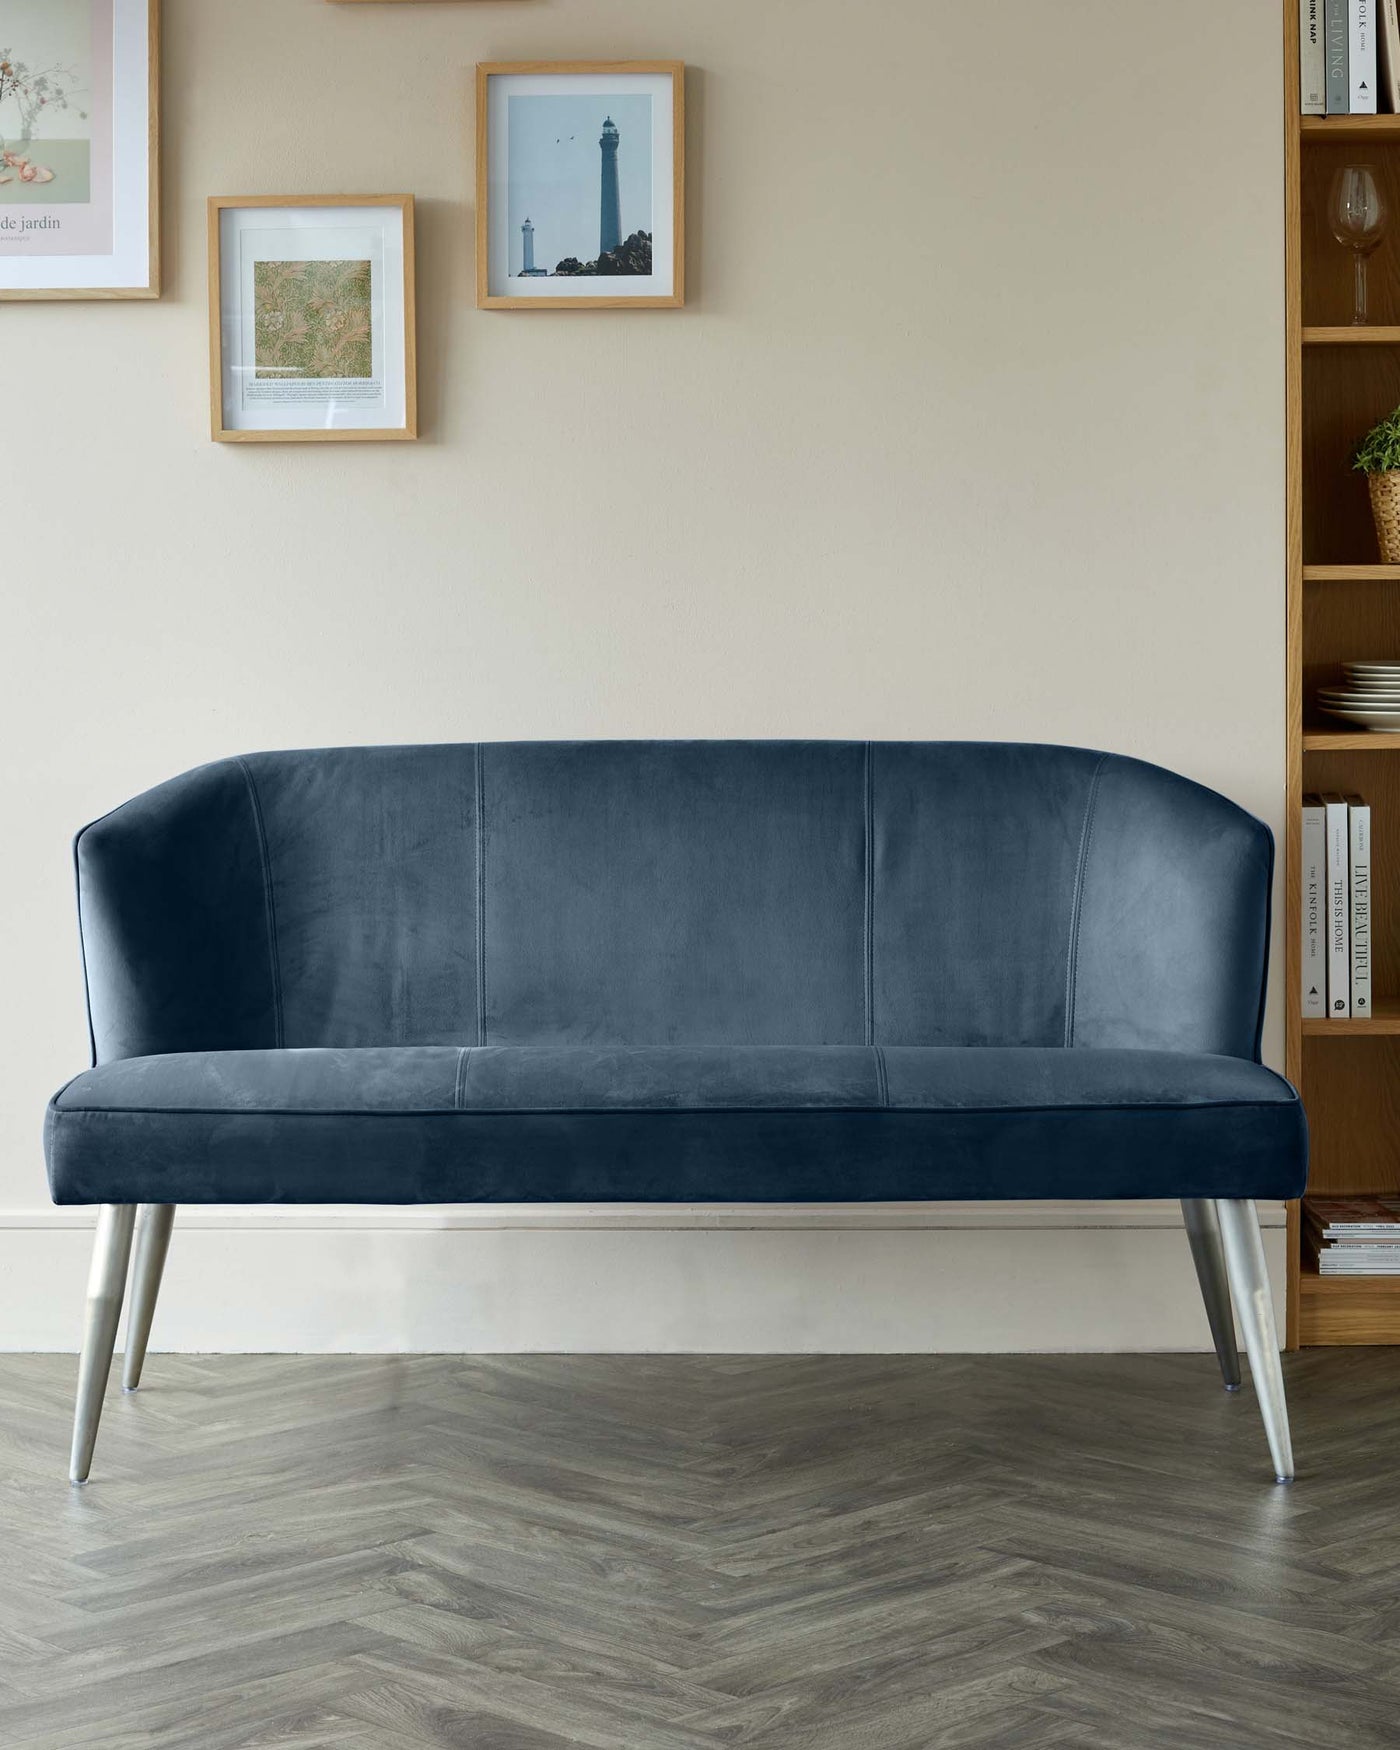 Elegant contemporary velvet sofa with a curvilinear silhouette, tufted backrest, and slanted metal legs.